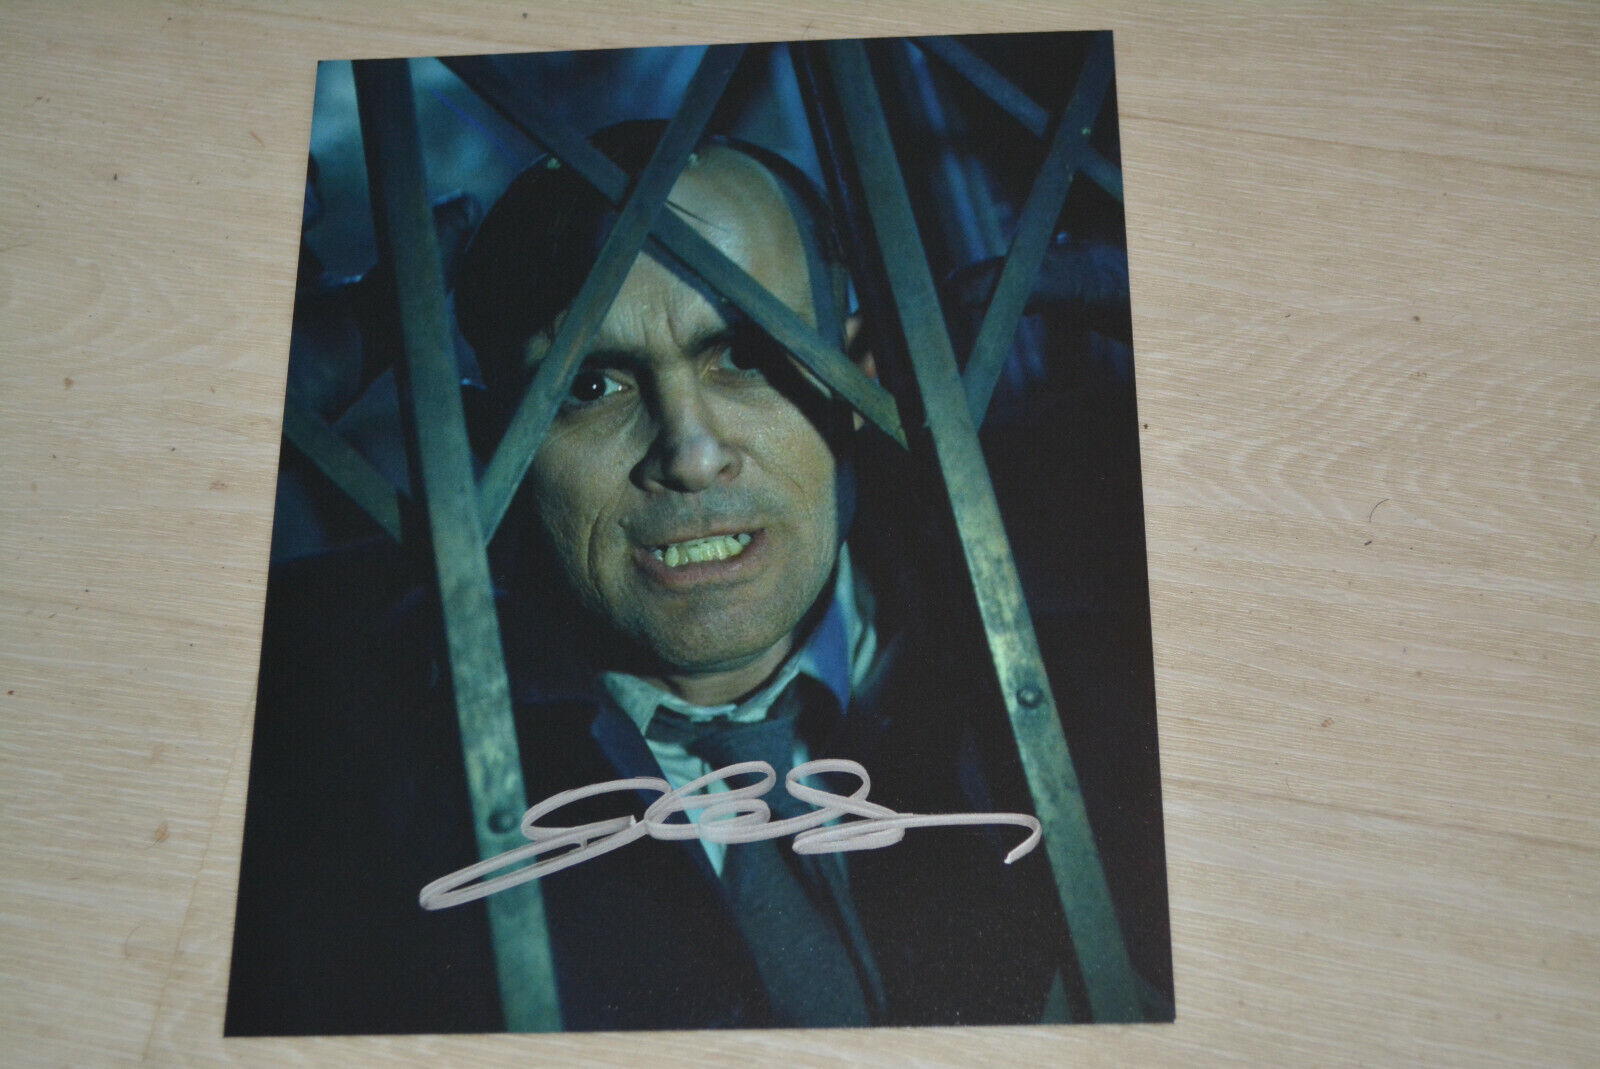 JEFFREY COMBS signed autograph 8x10 20x25 cm In Person THE FRIGHTENERS